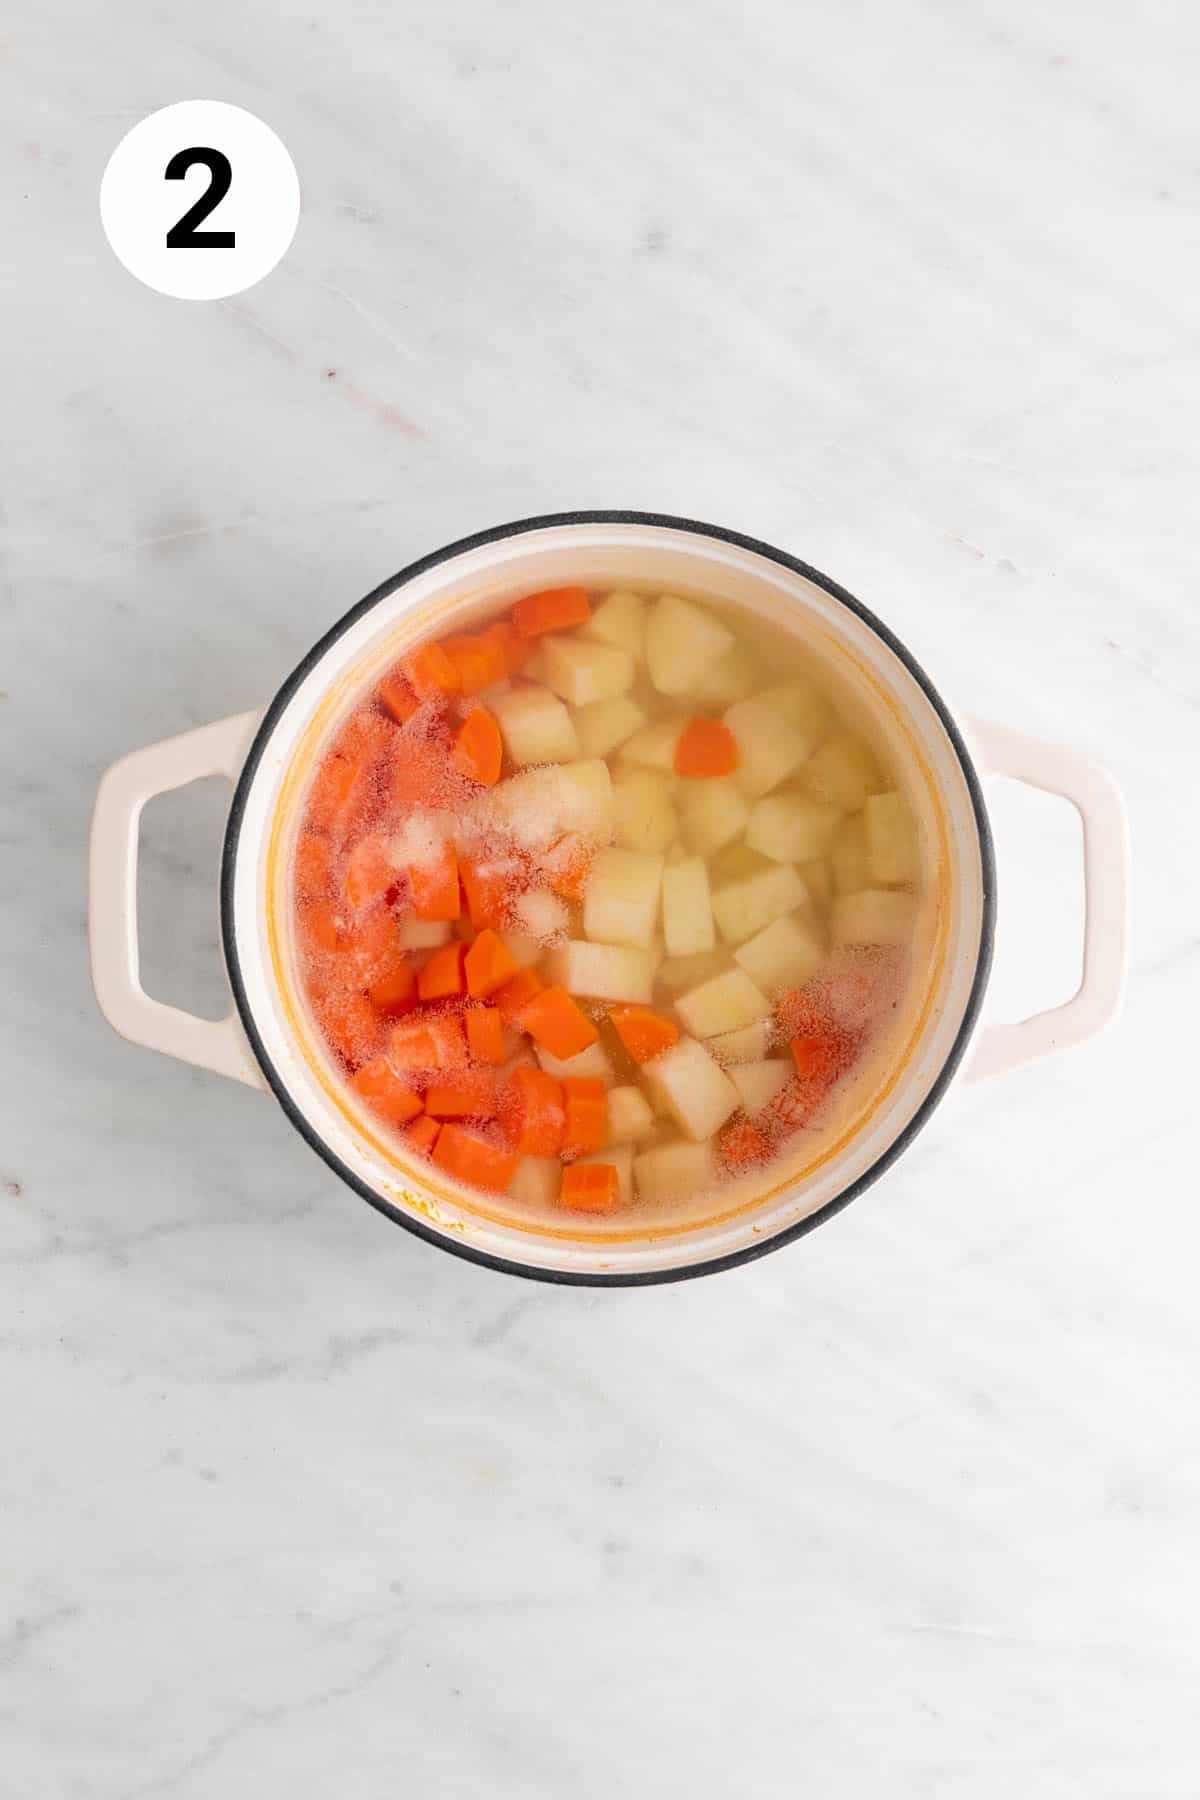 Boiled potatoes and carrots in a pot.